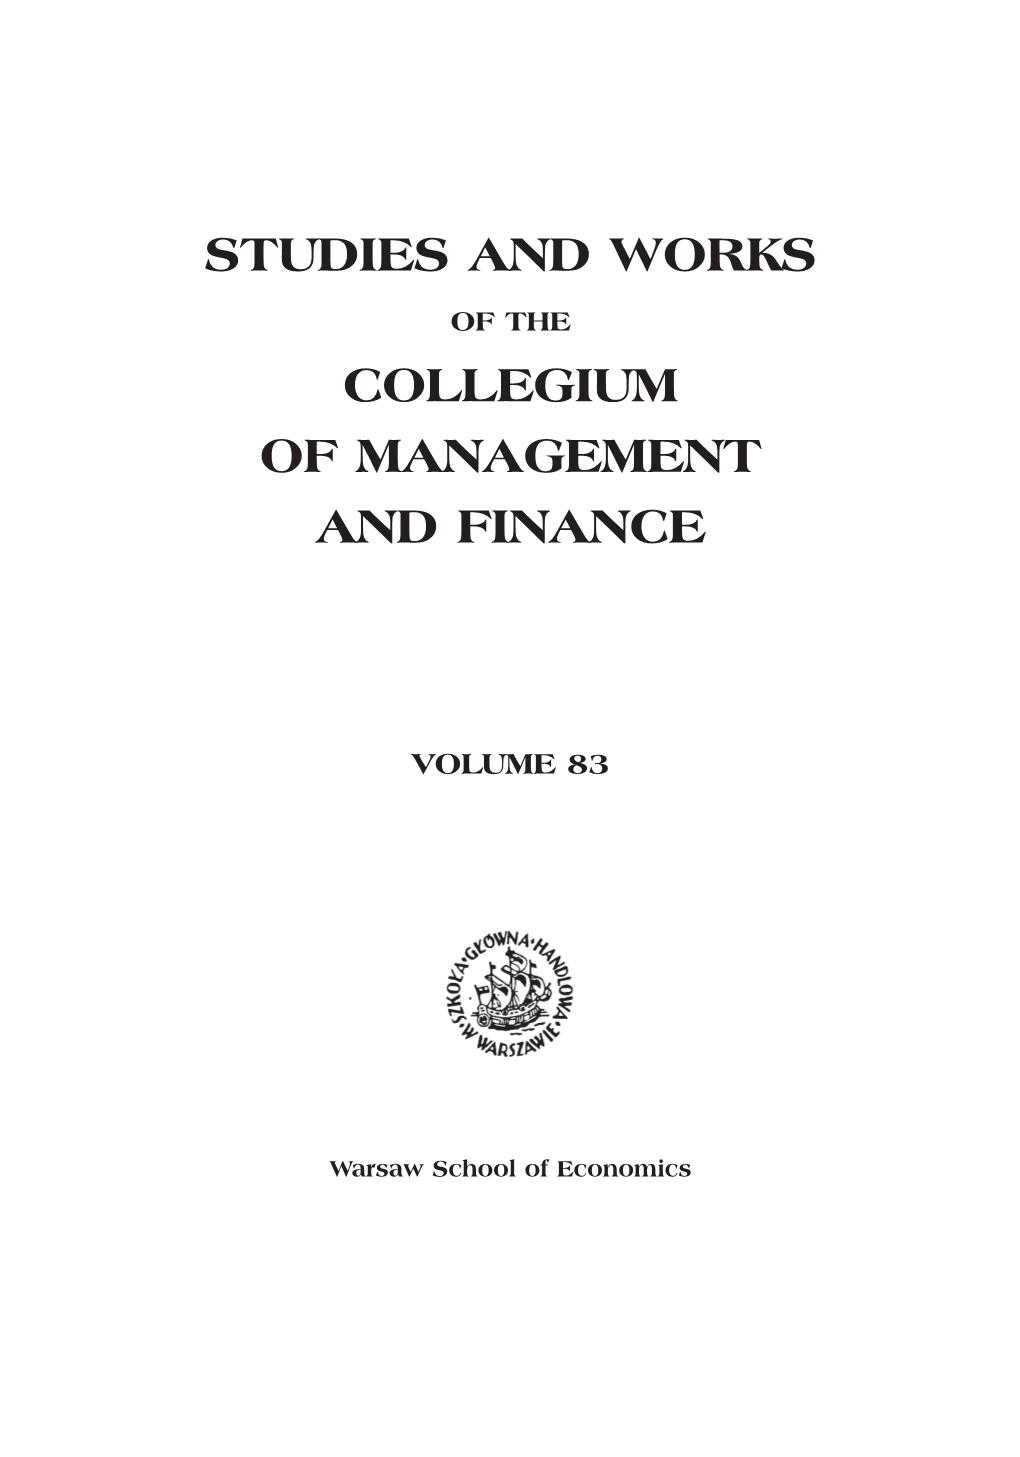 Studies and Works Collegium of Management and Finance